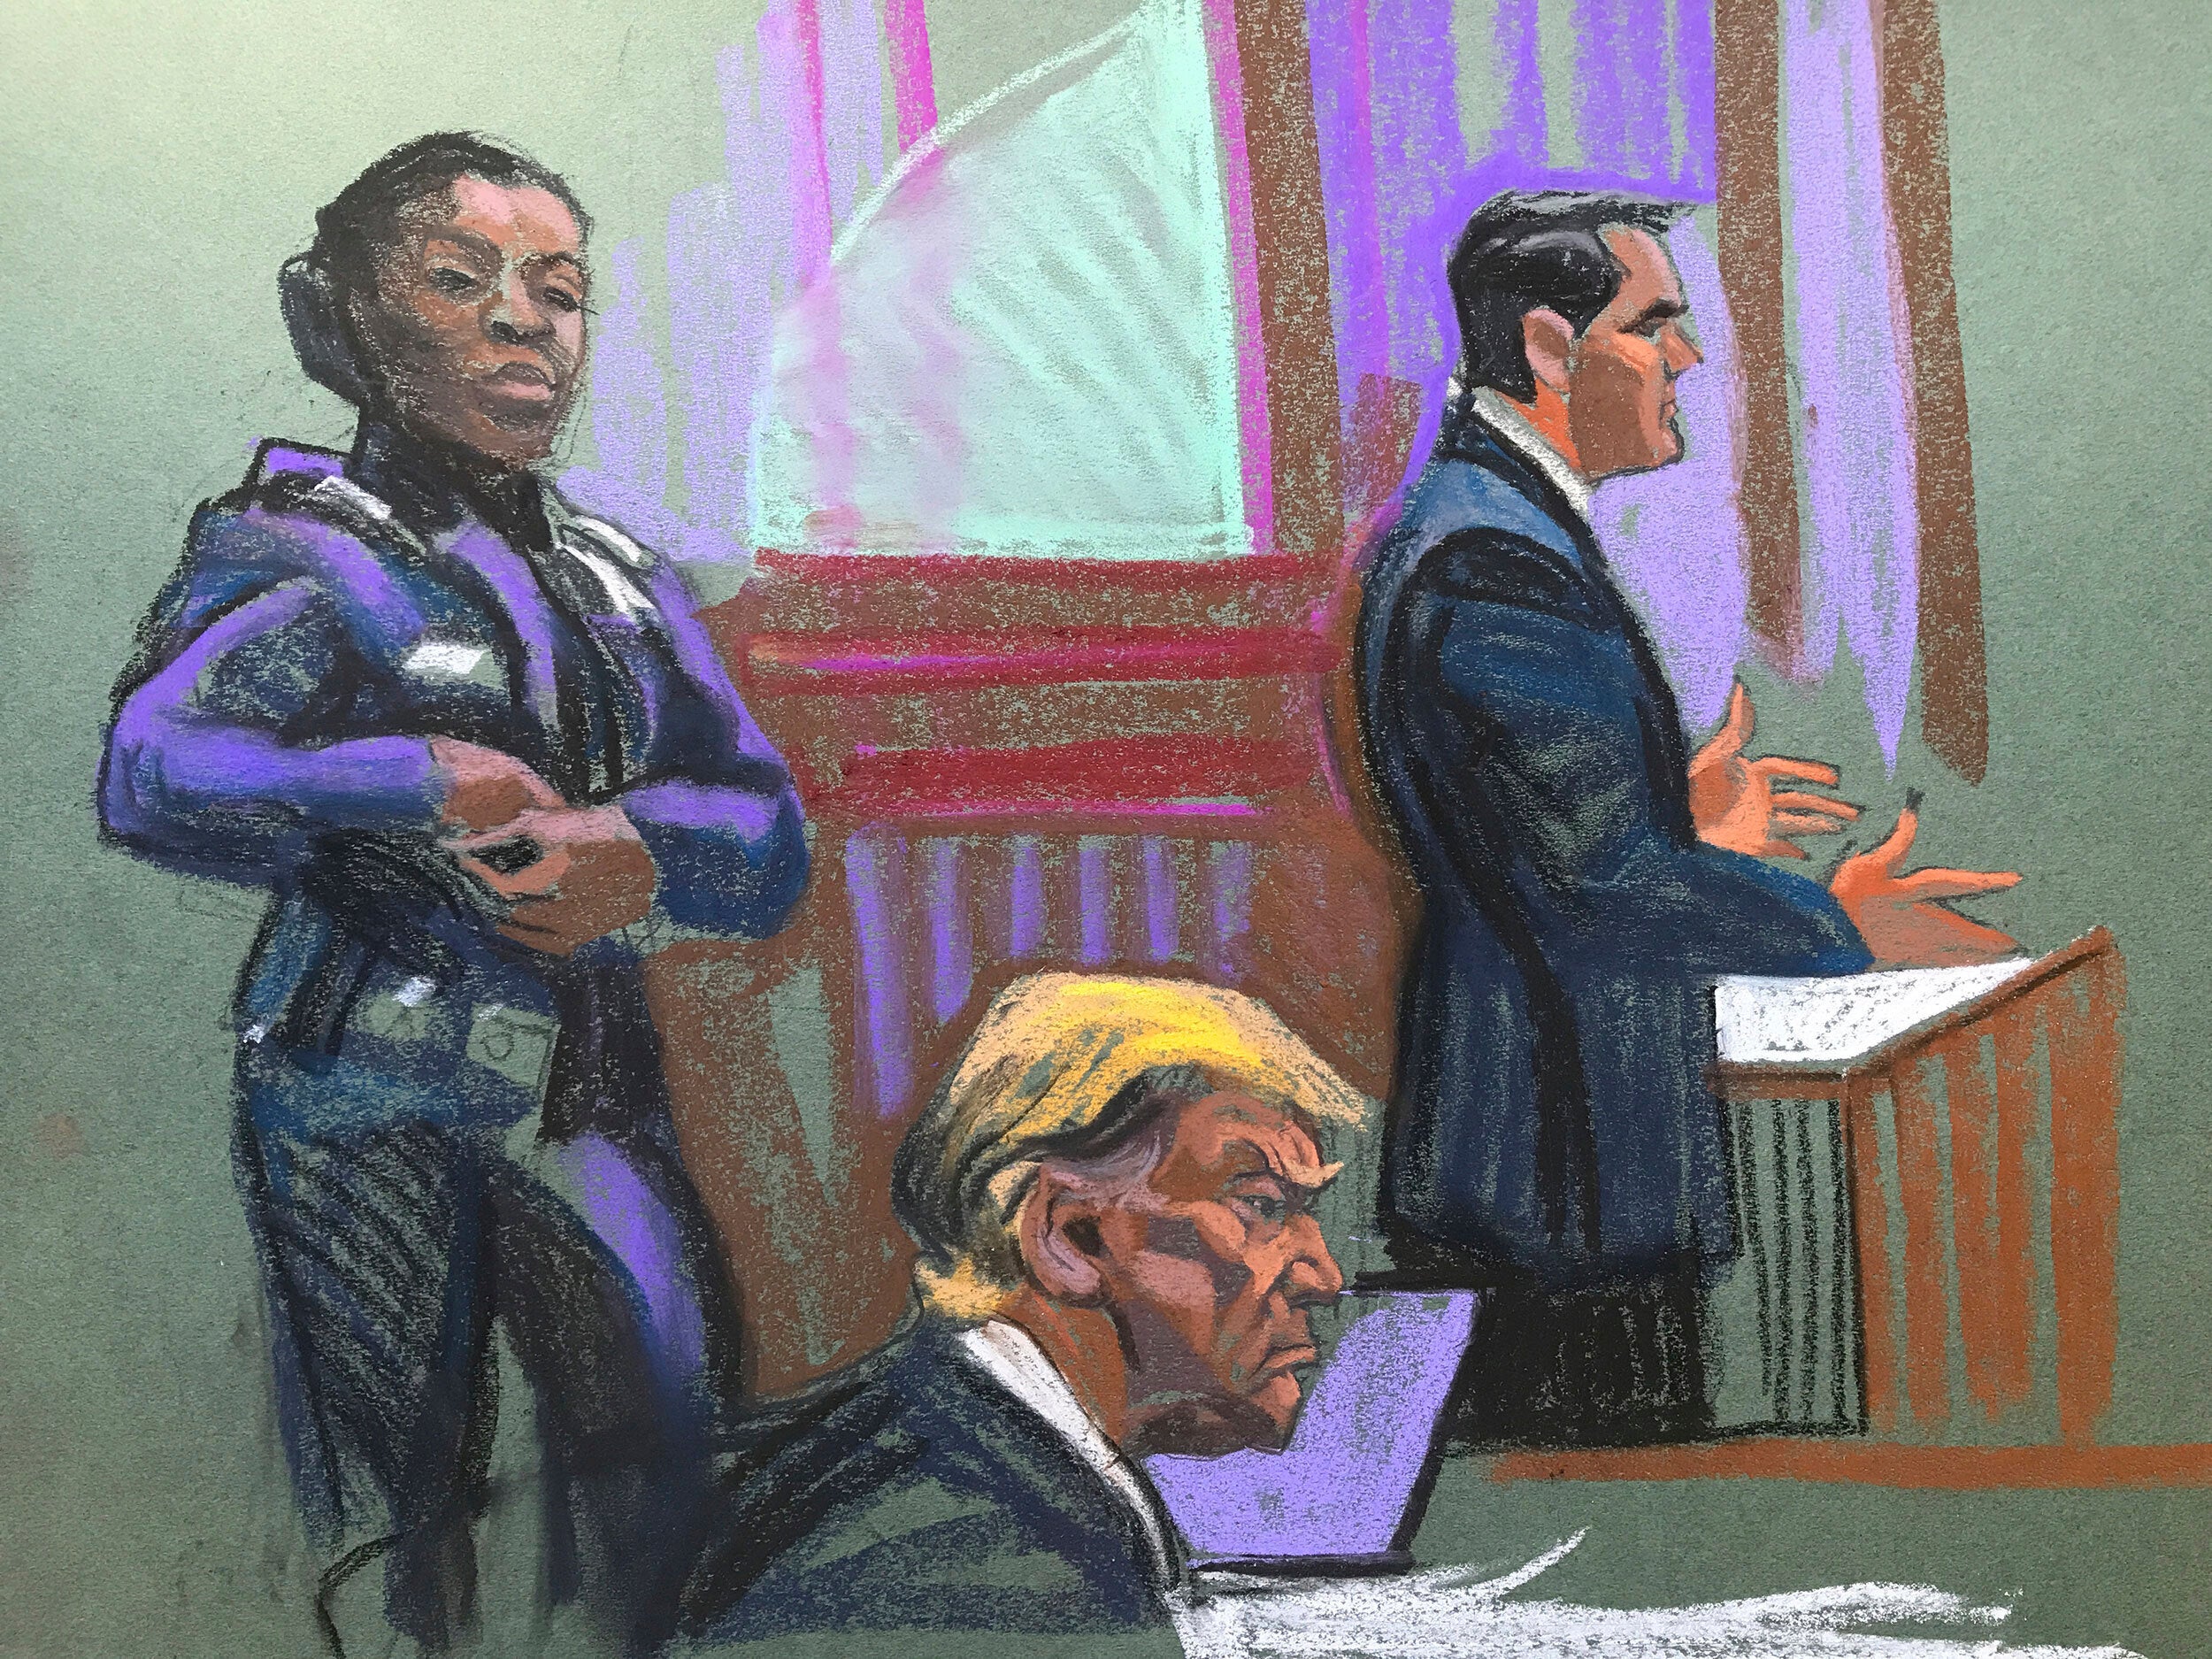 Donald Trump, seen in this courtroom sketch during day two of his hush money trial in New York City, faces nearly three dozen counts of falsifying business records